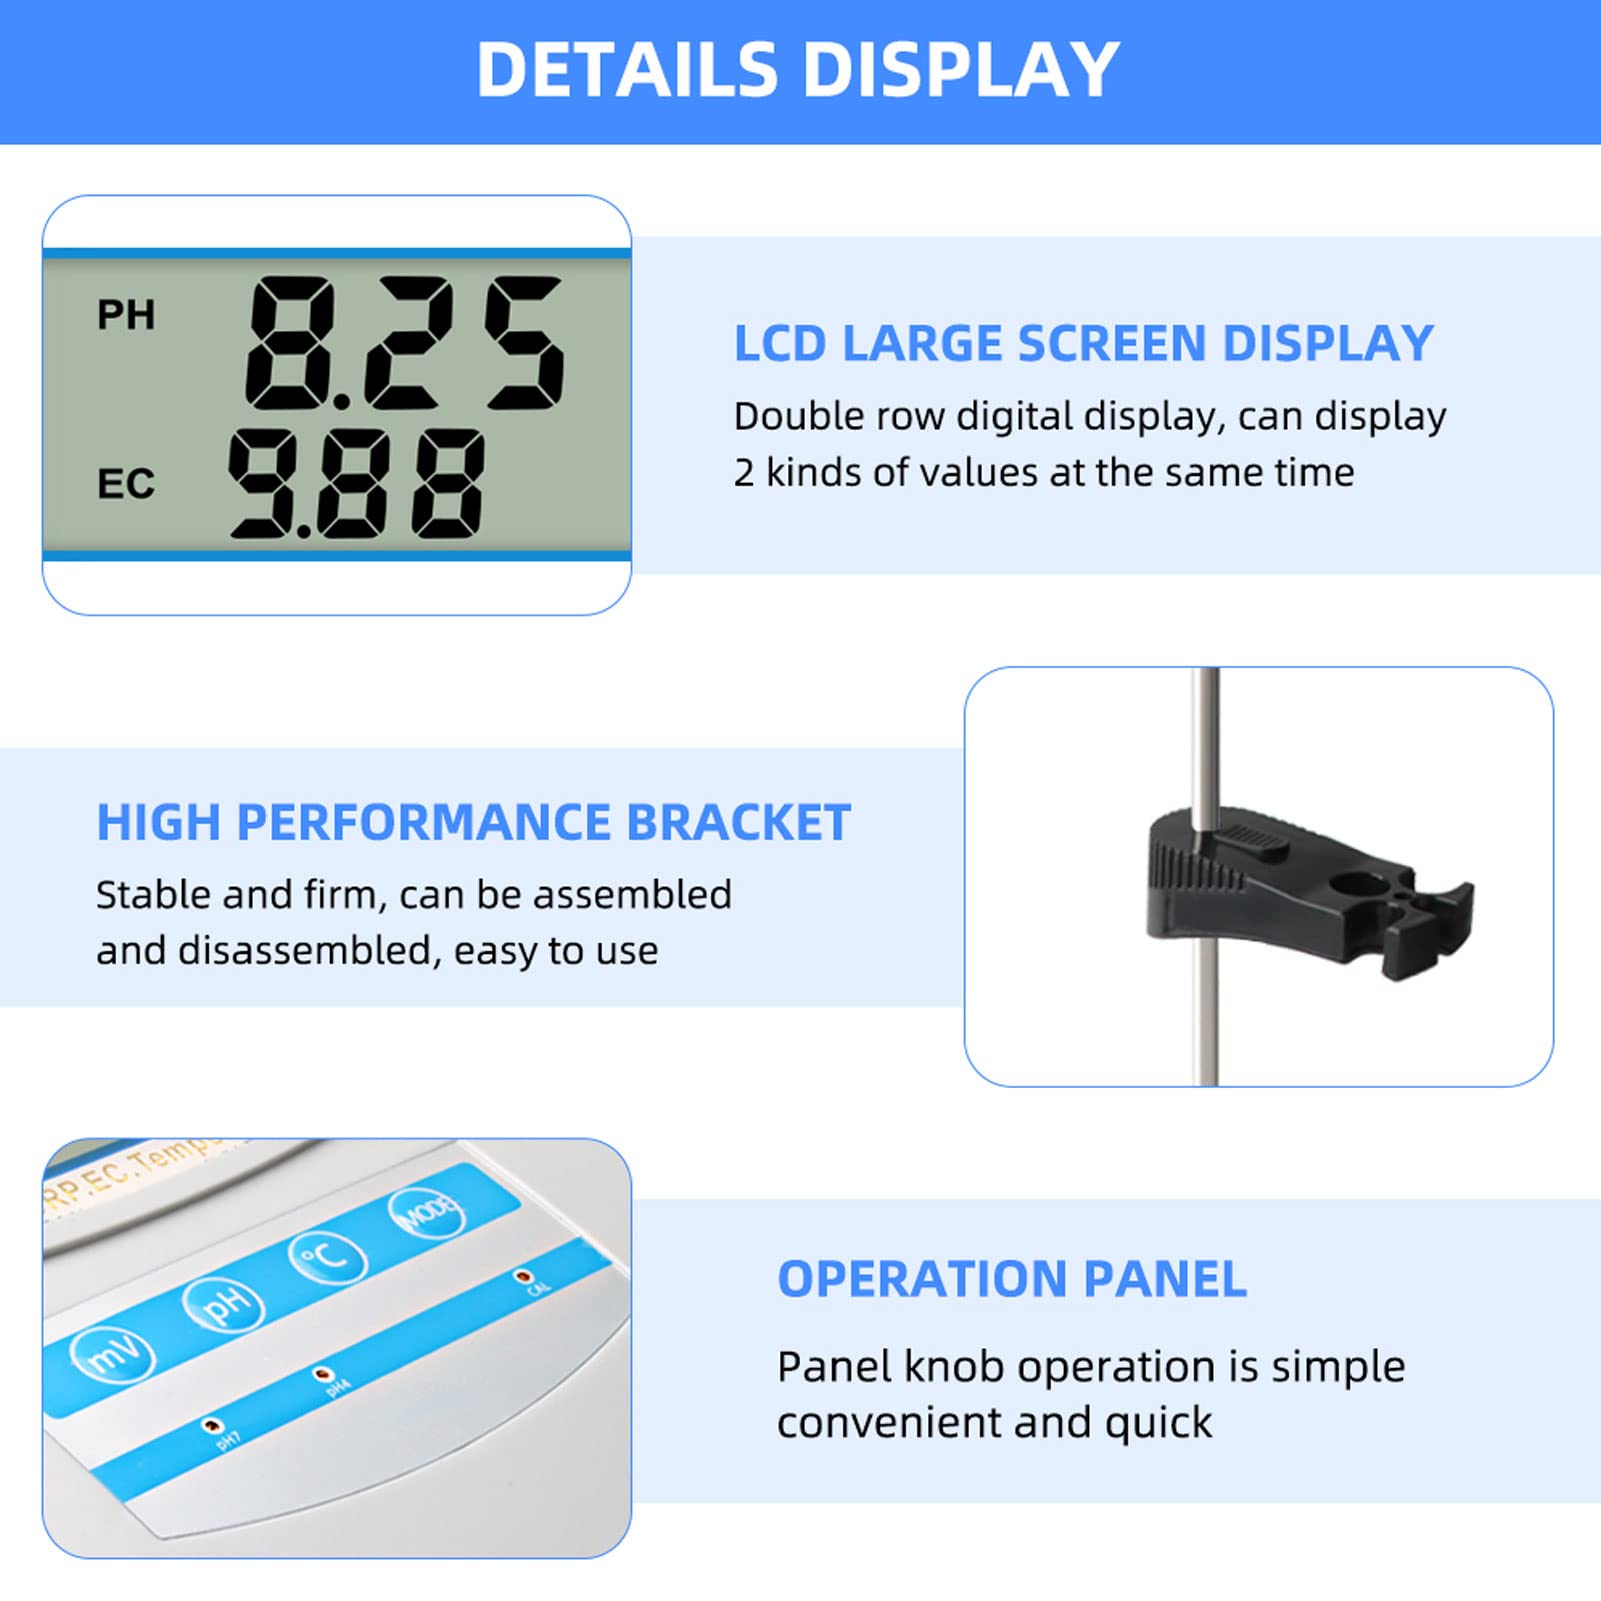 Water Quality Monitor, LCD Display, with High Precise PH, Temperature and EC Probe, 0°C to 50°C Auto Compensate Temperature, 6 in 1 PH ORP EC CF TDS Temperature Tester(USA)